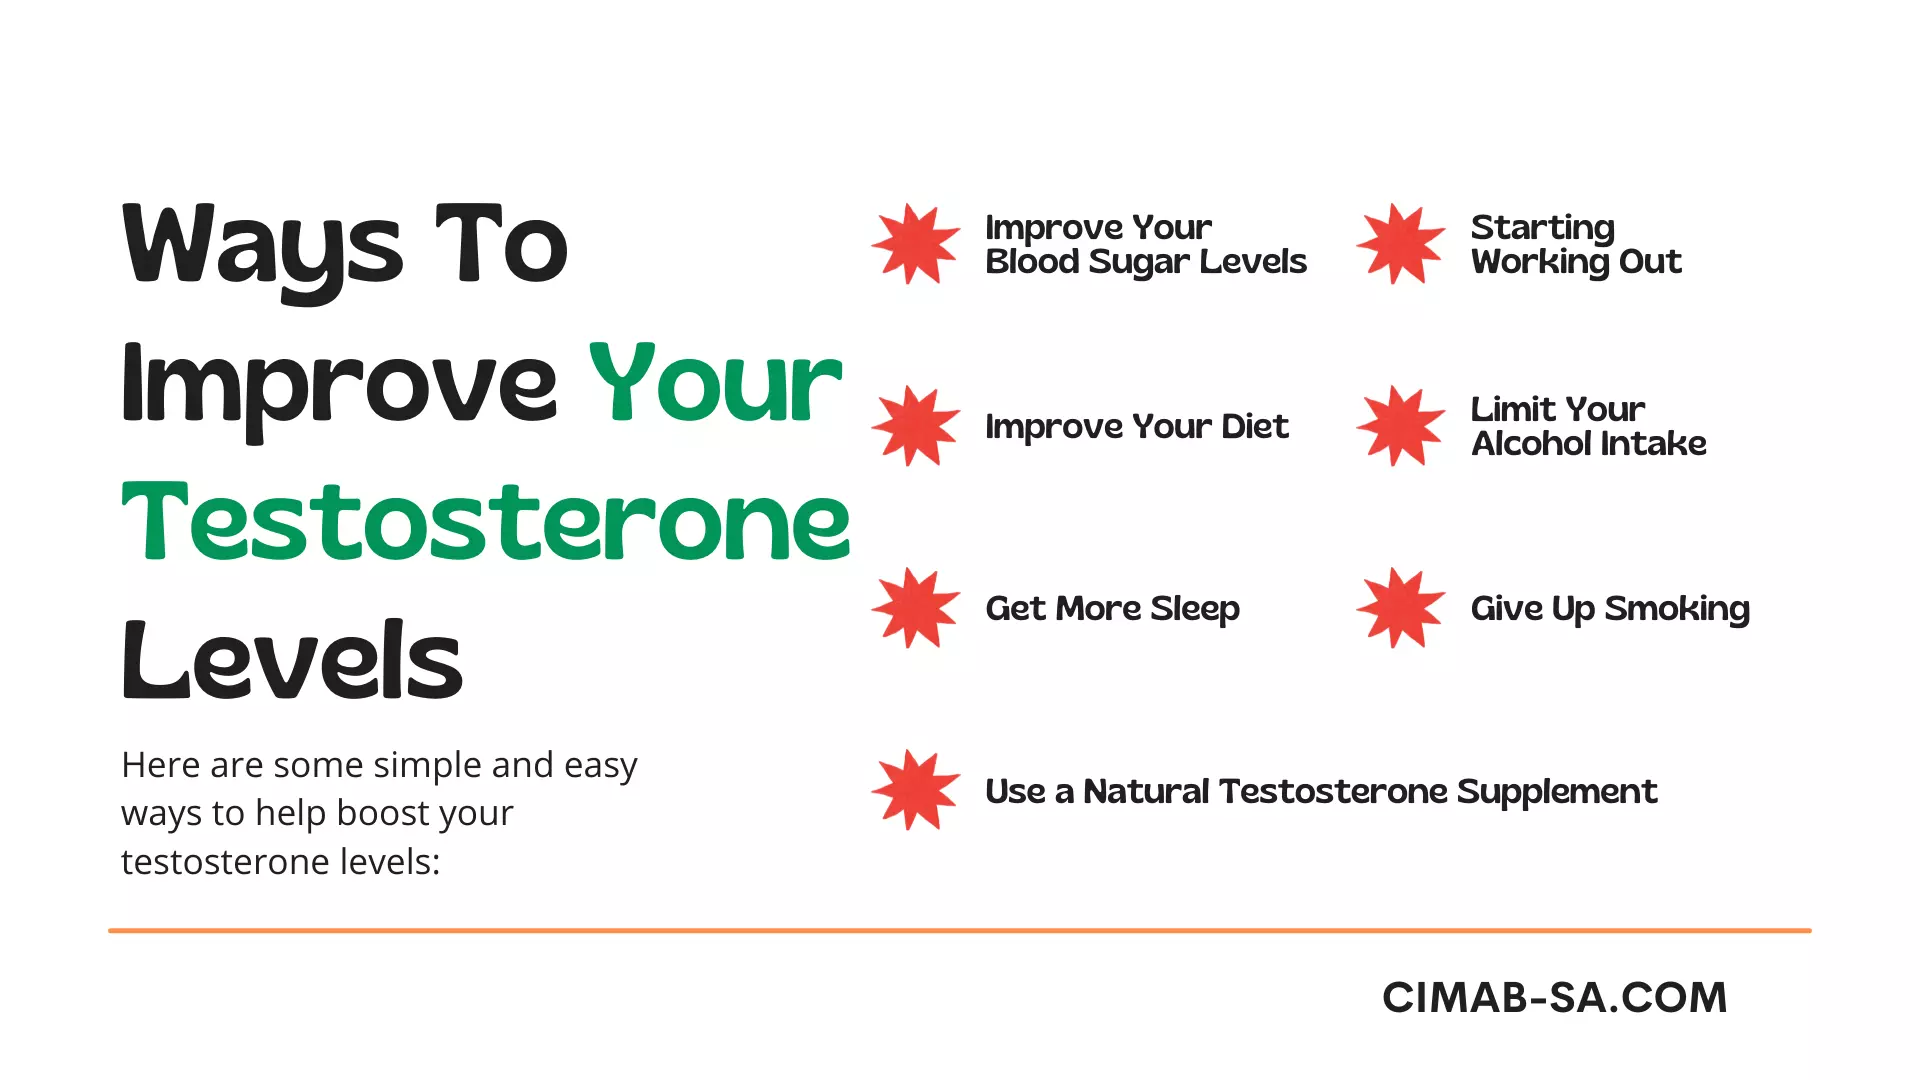 Ways To Improve Your Testosterone Levels